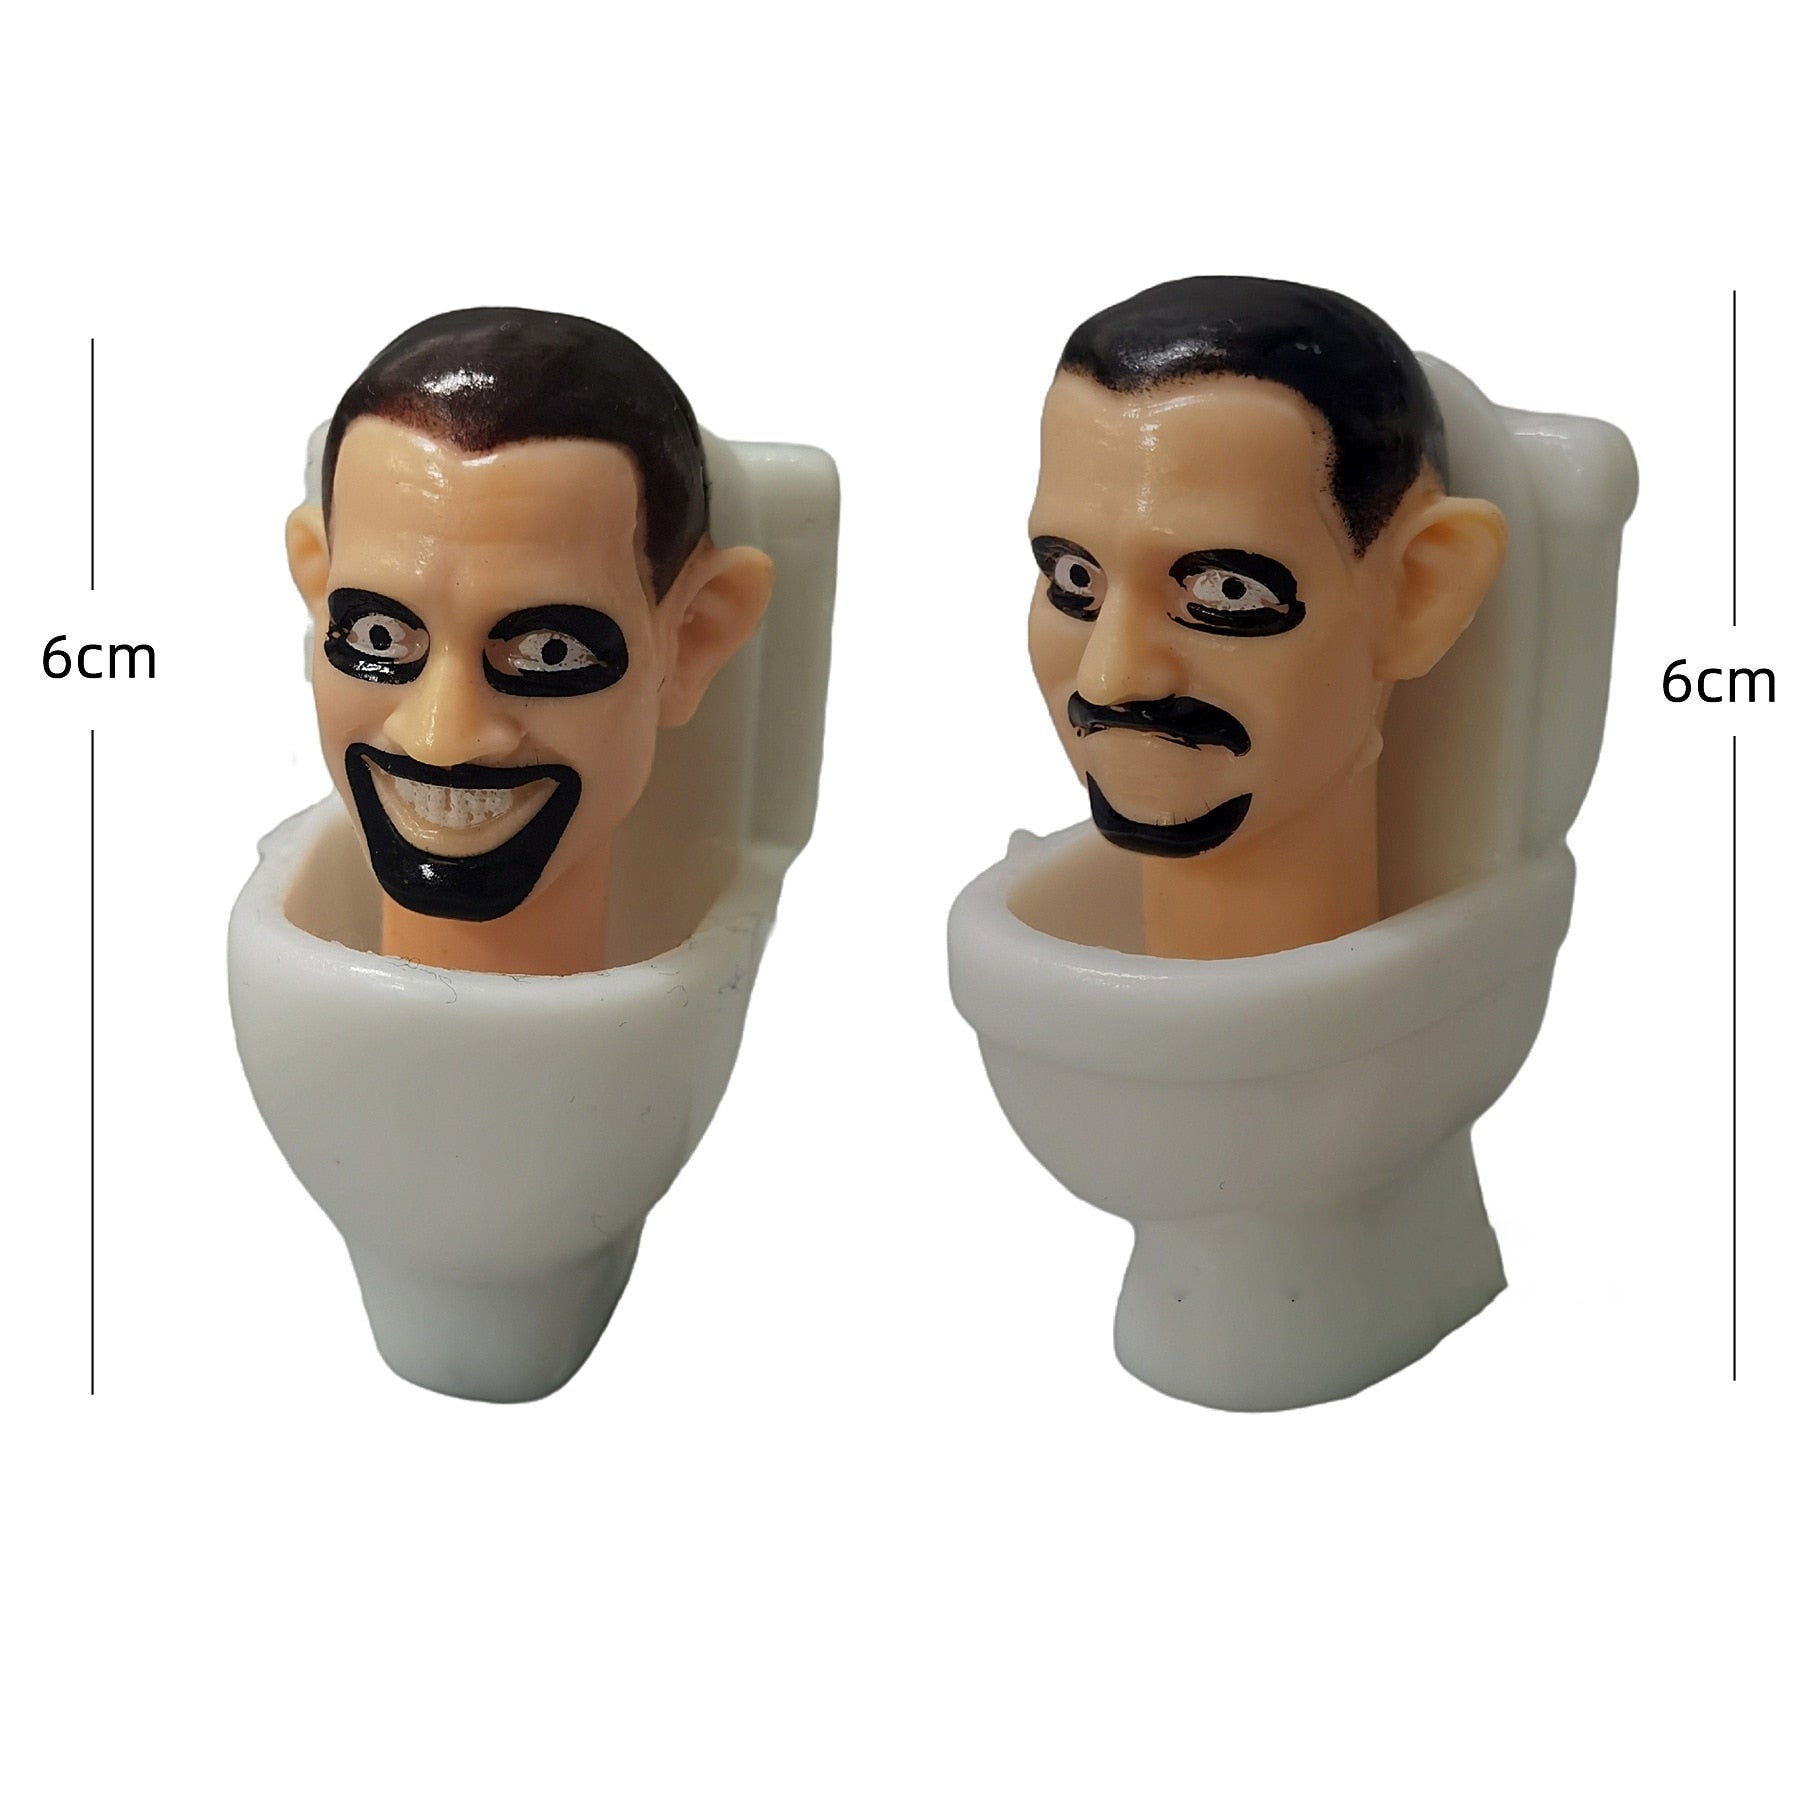 Skibidi Toilet Plush: The Perfect Gift for Fans of the Skibidi Song –  dilutee